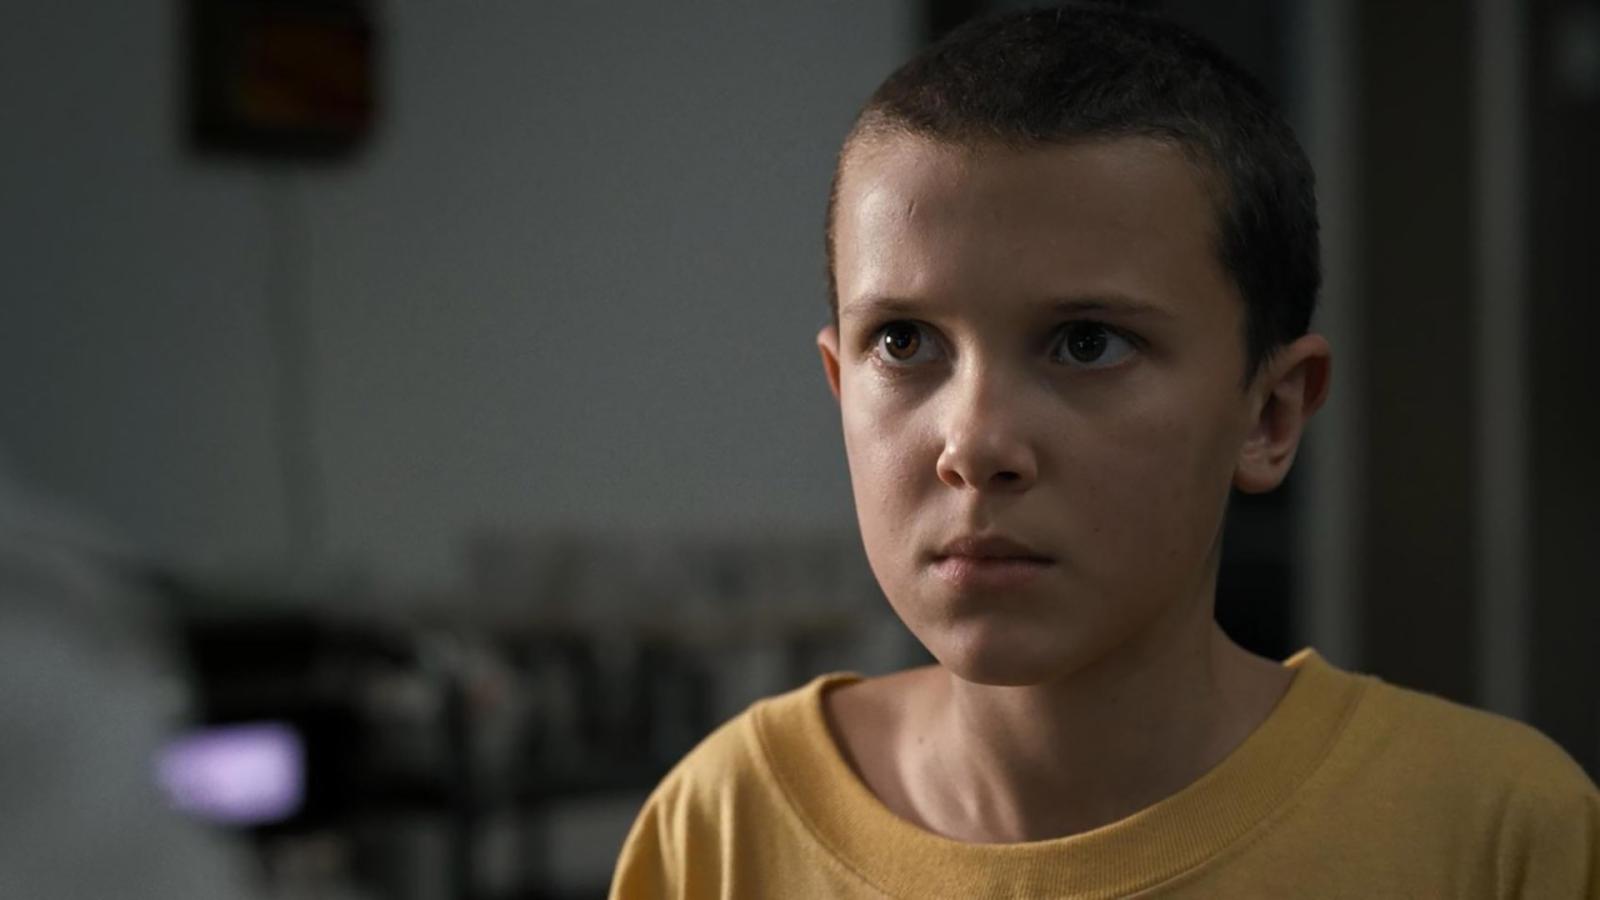 Discover Your Stranger Things Alter Ego Based on Your Zodiac - image 1